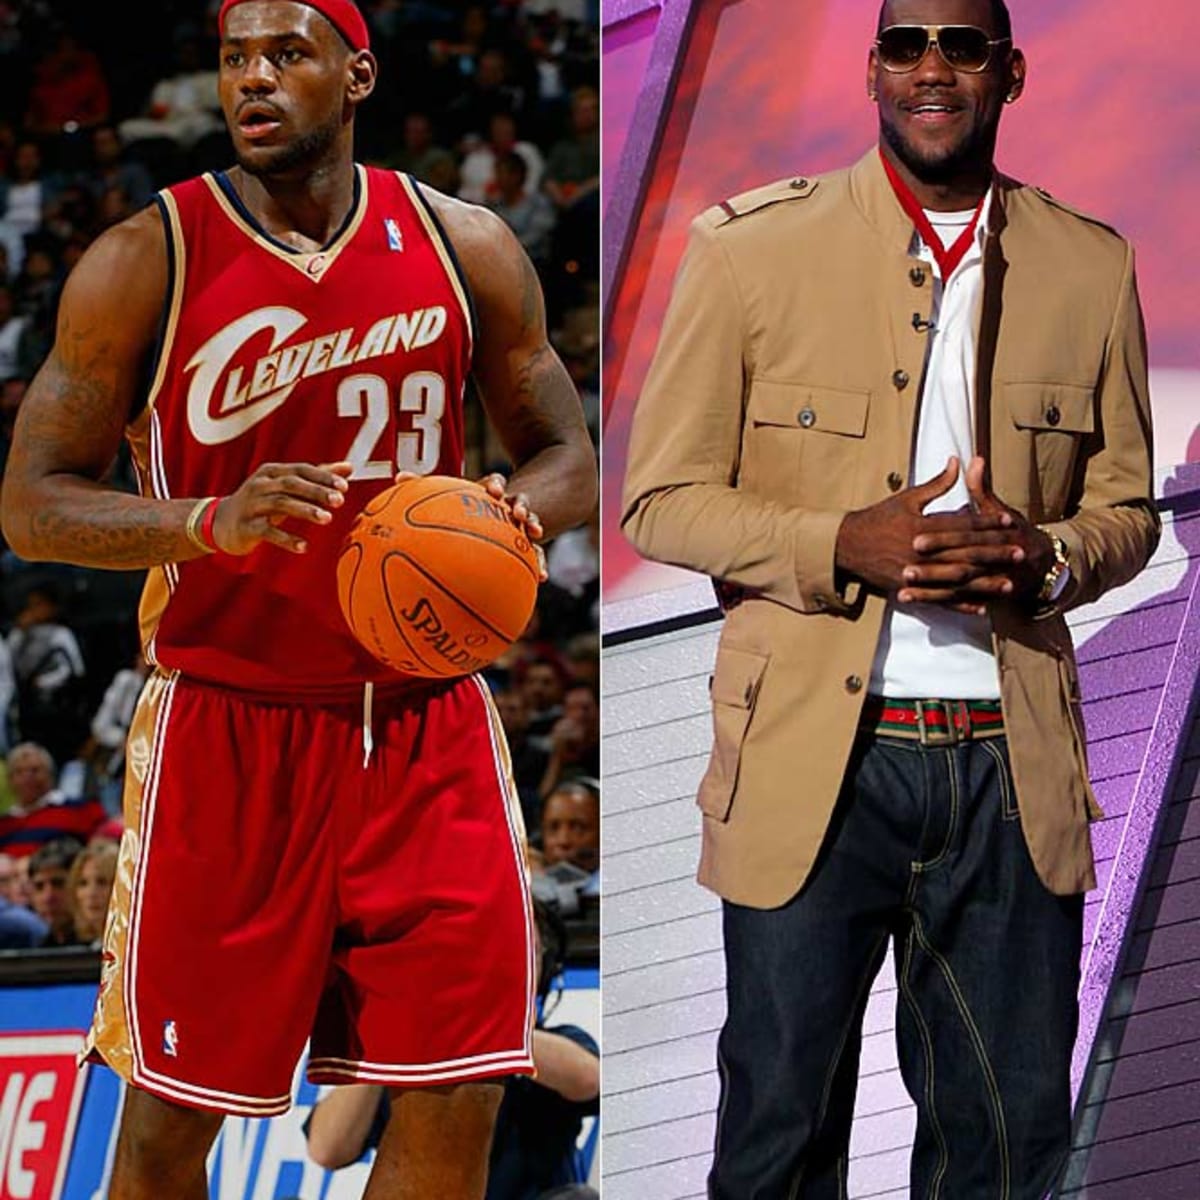 LeagueFits Hall of Fame: The Best-Dressed Basketball Players of All-Time